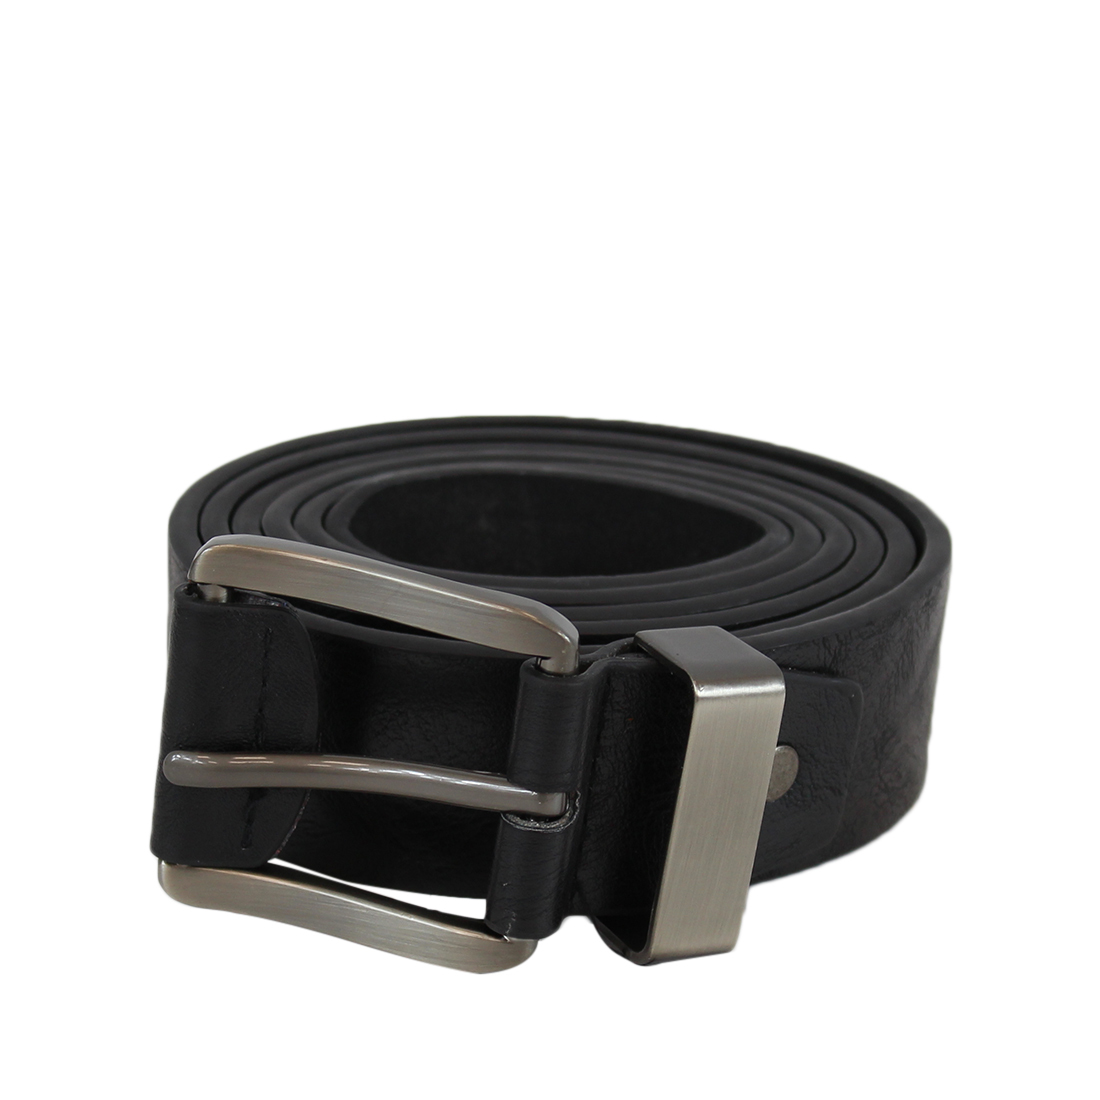 Plain wide leather belt with silver leathered buckle